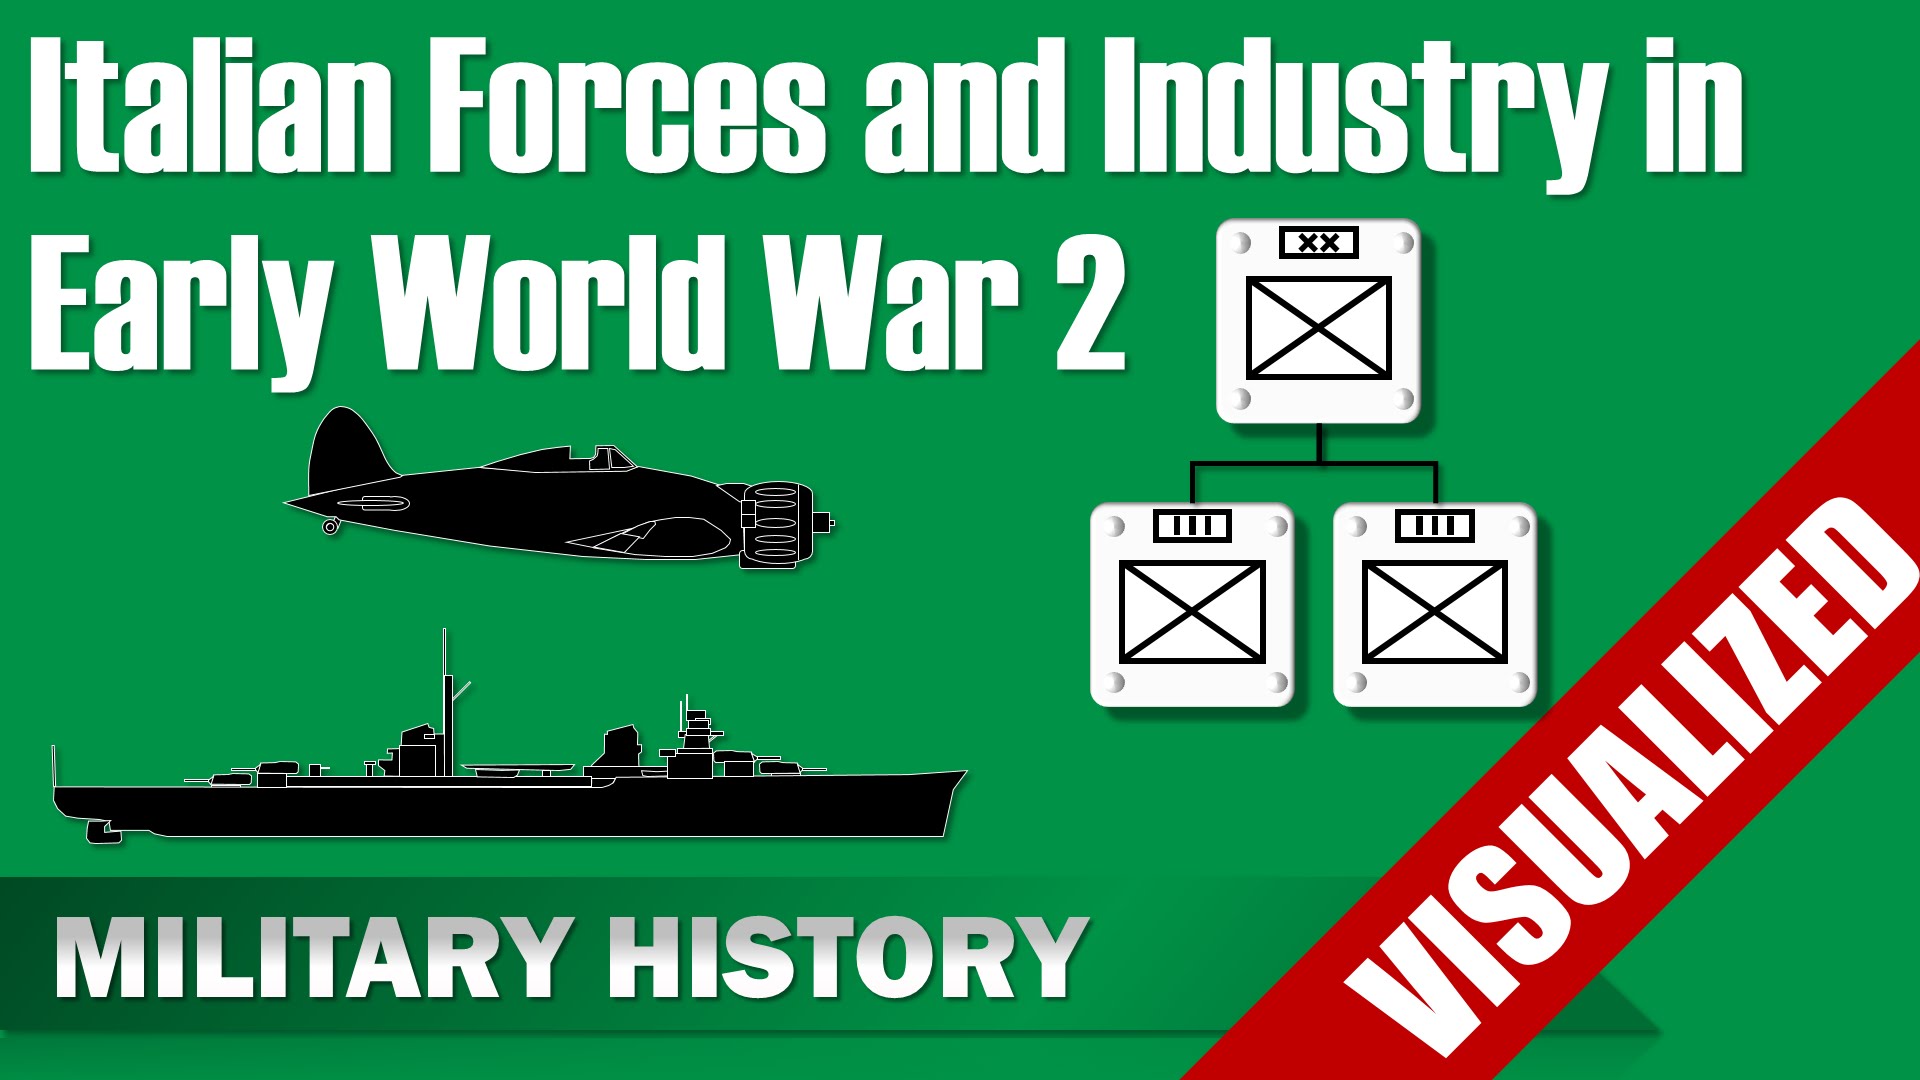 Italian Forces and Industry in Early World War 2